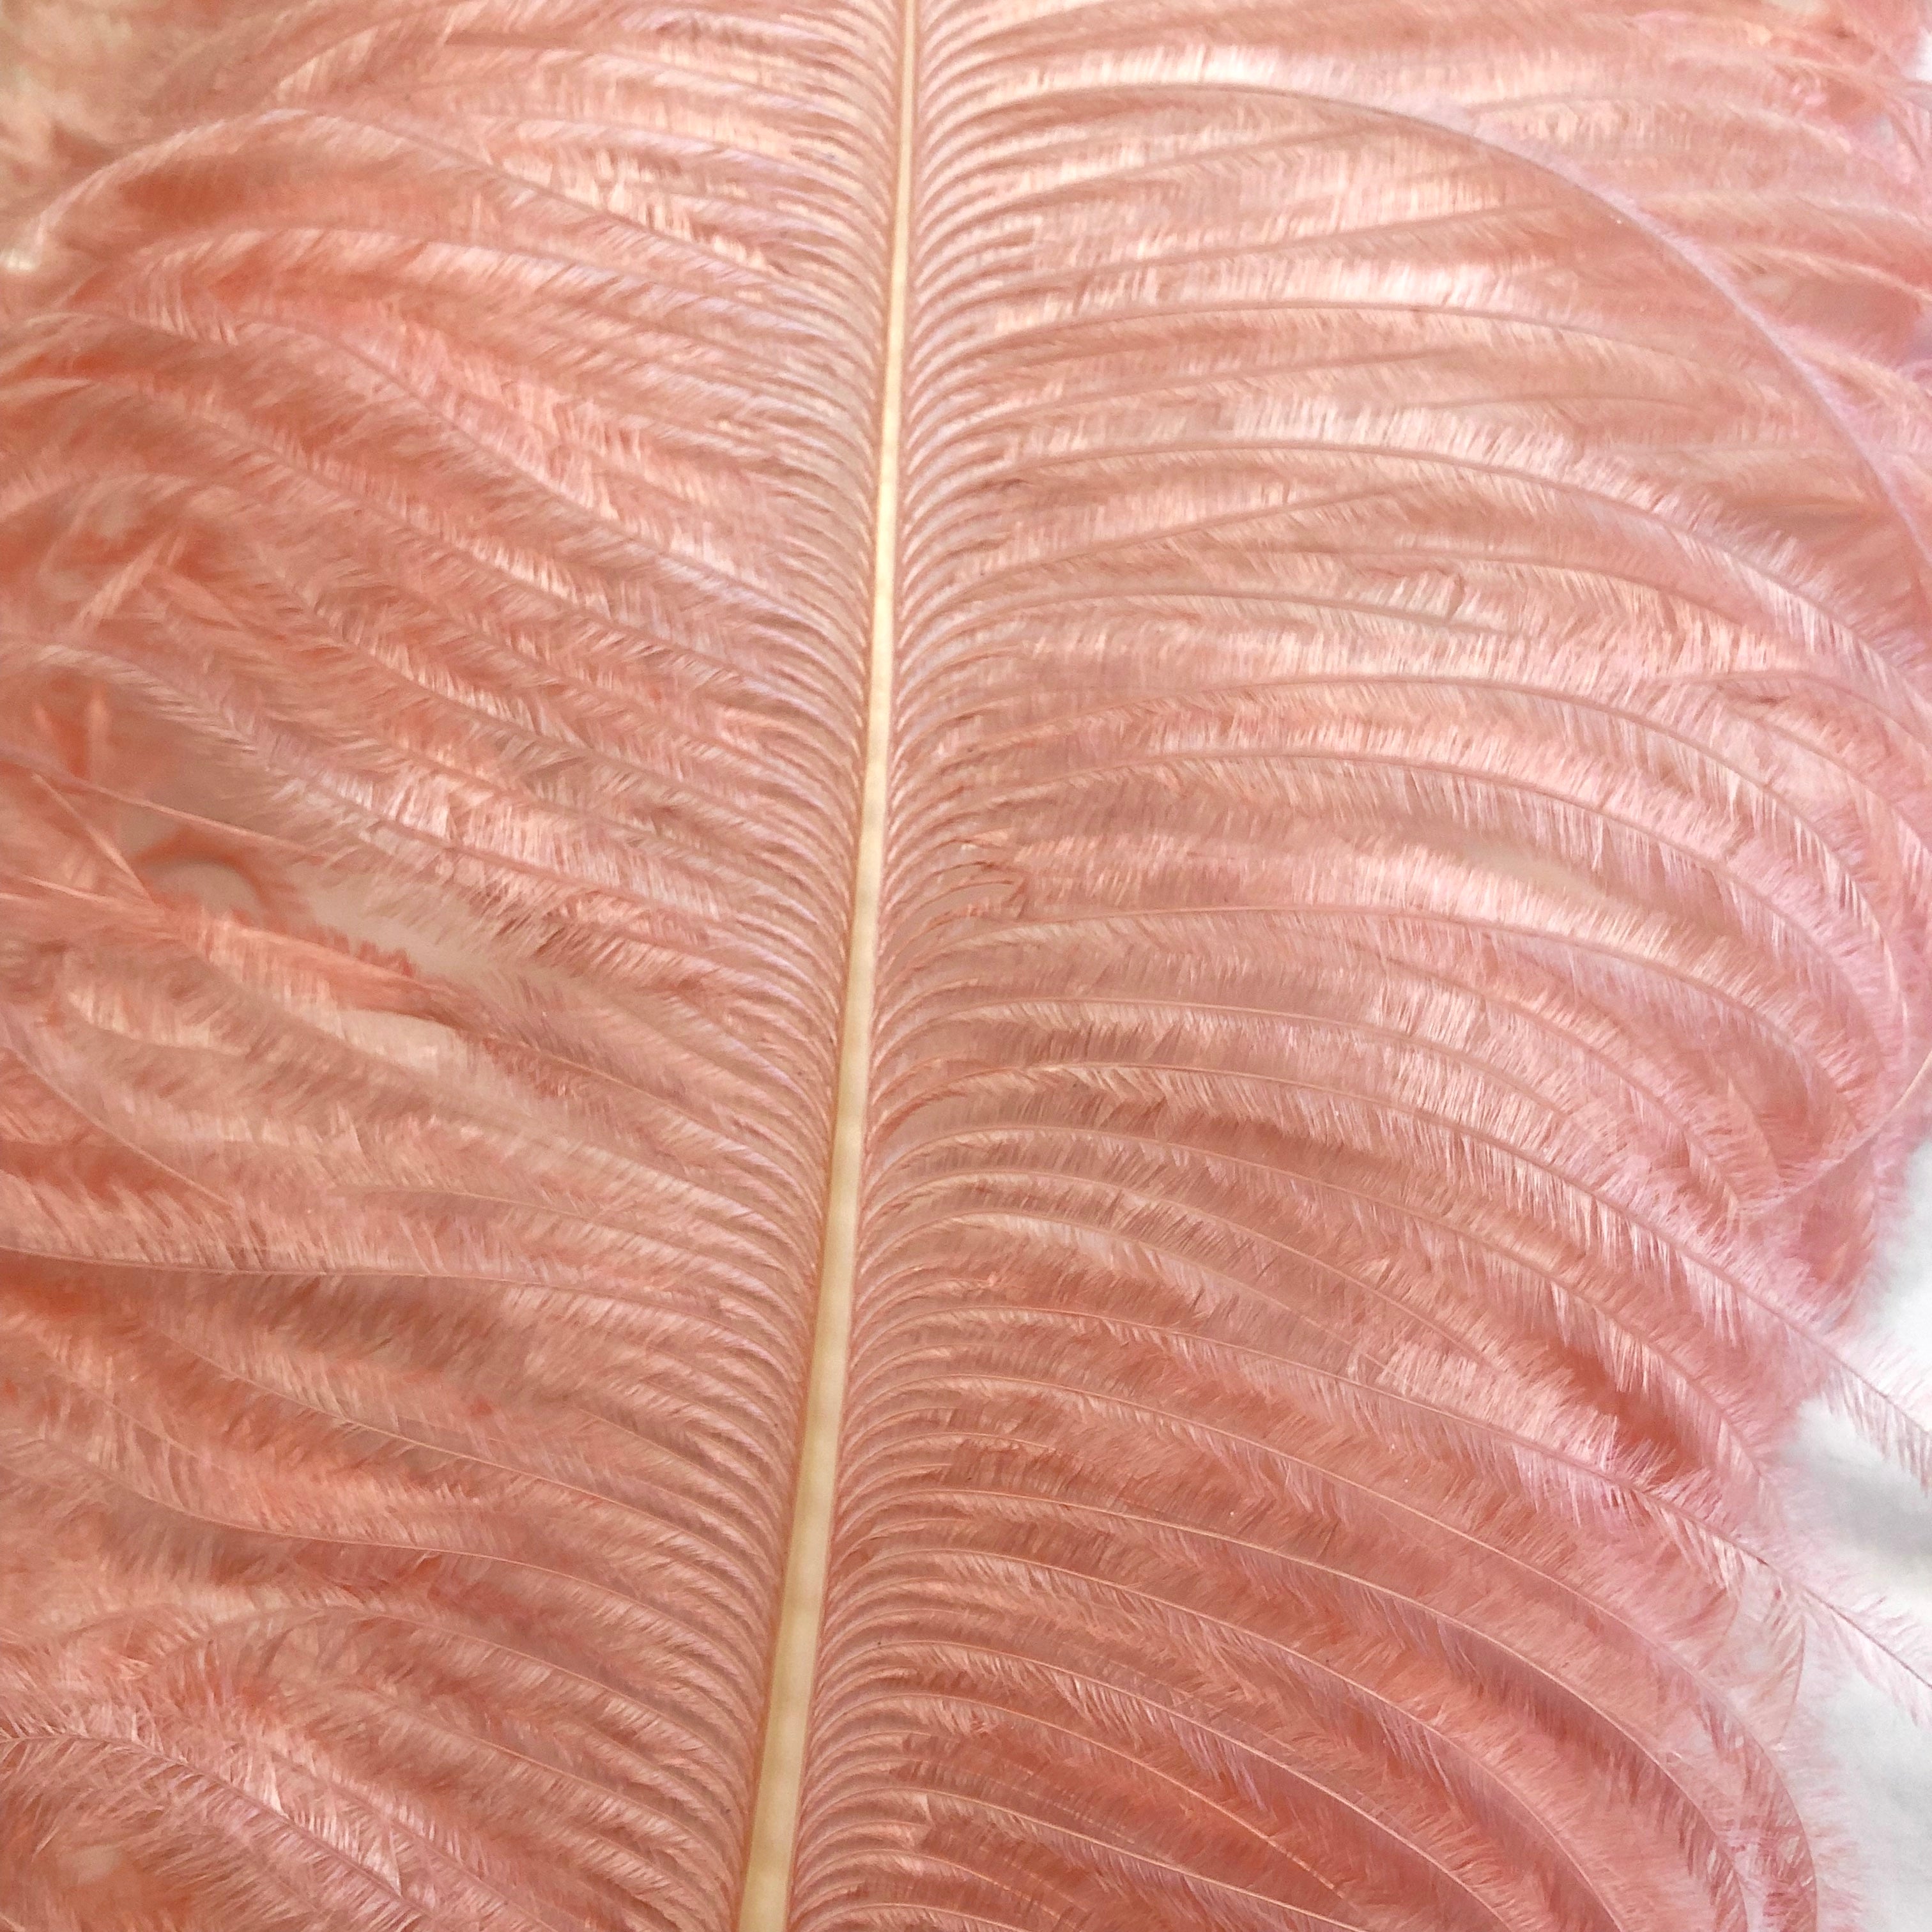 Ostrich Wing Feather Plumes 50-55cm (20-22") - Blush Pink